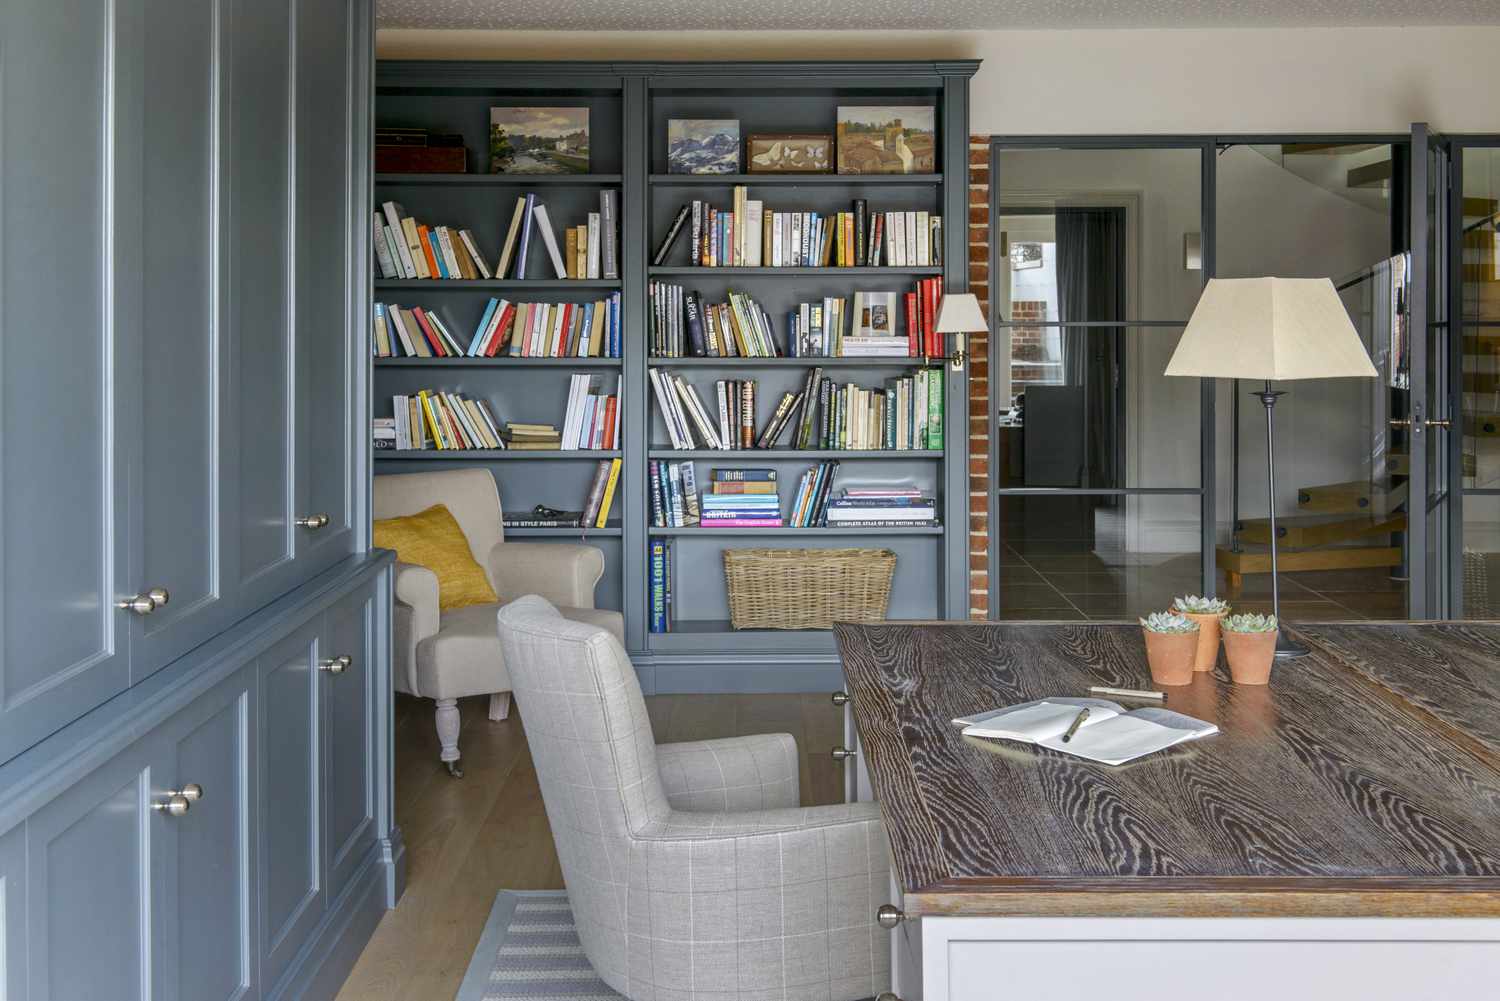 Faked built-ins in an office by Sims Hilditch designers